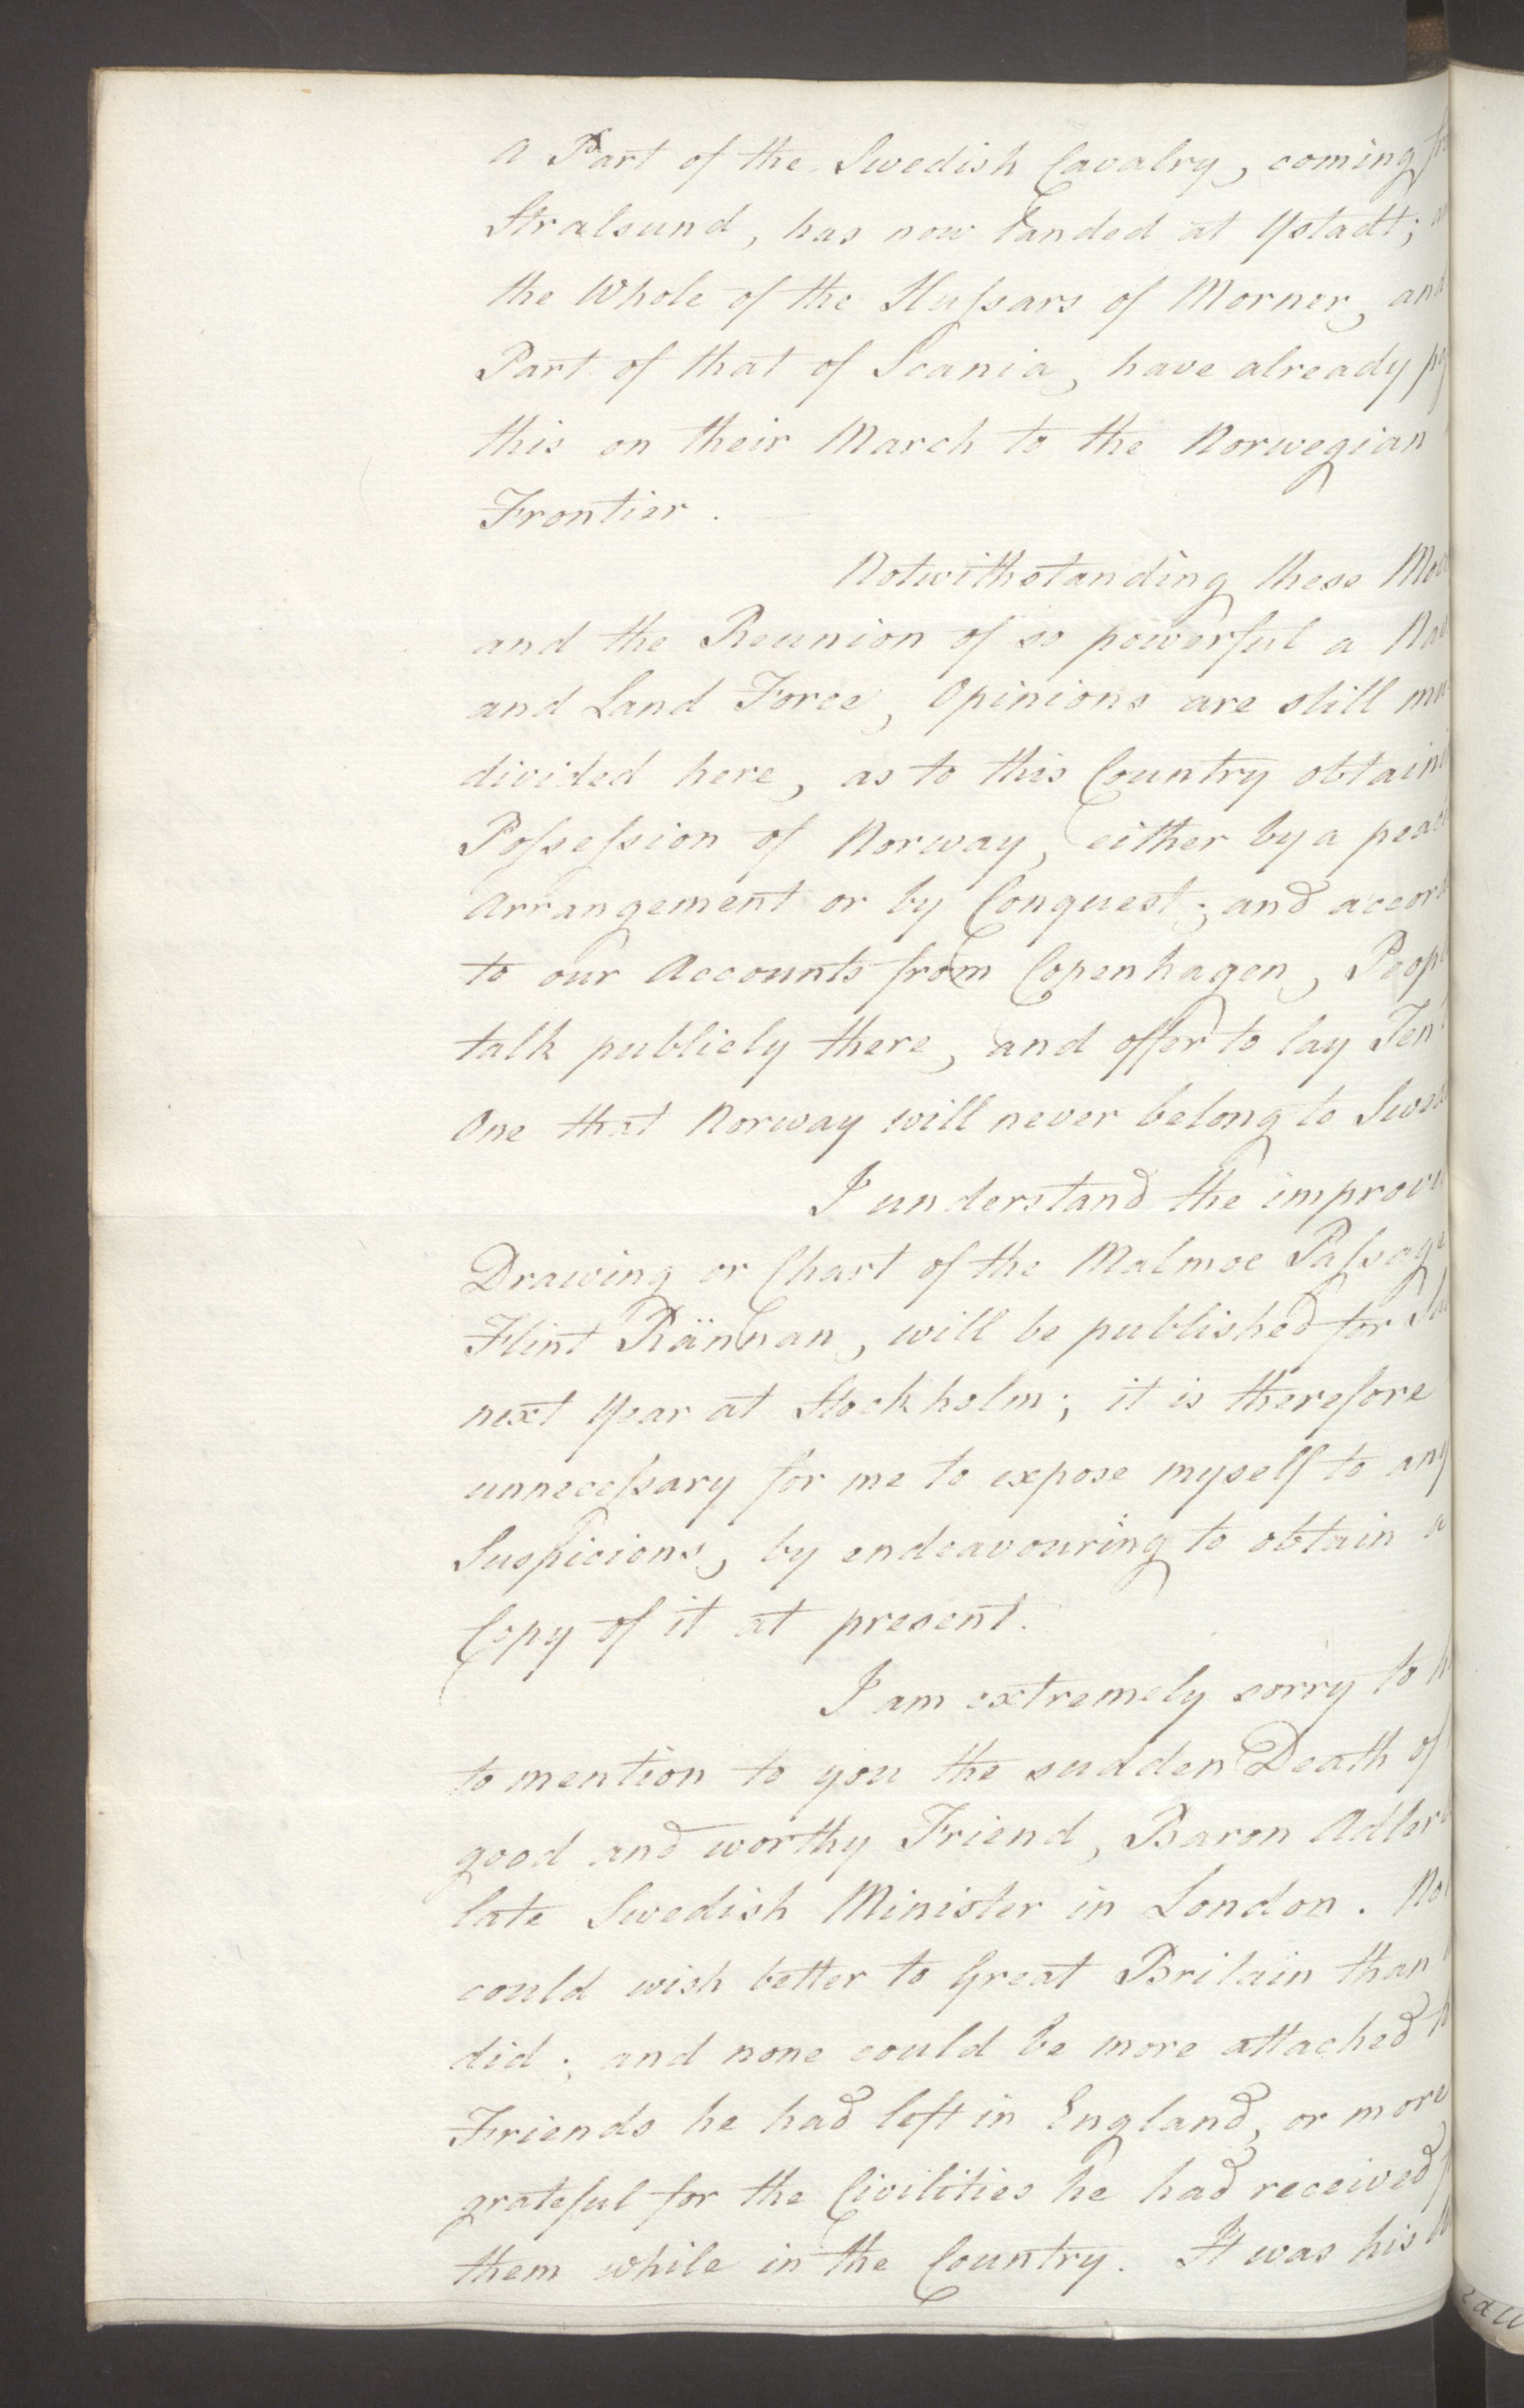 Foreign Office*, UKA/-/FO 38/16: Sir C. Gordon. Reports from Malmö, Jonkoping, and Helsingborg, 1814, p. 72